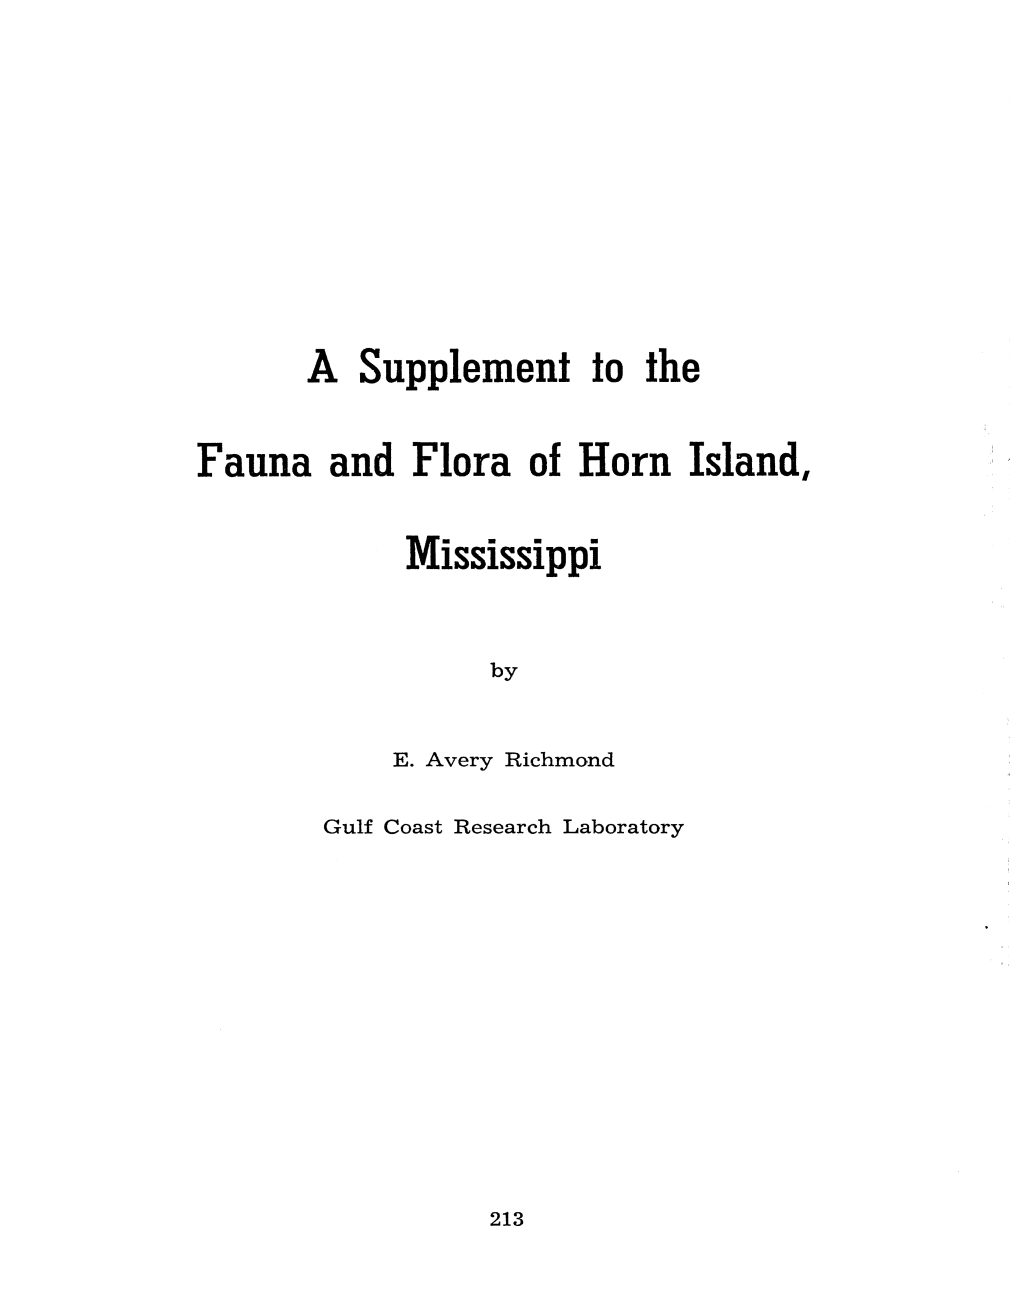 A Supplement to the Fauna and Flora of Horn Island, Mississippi